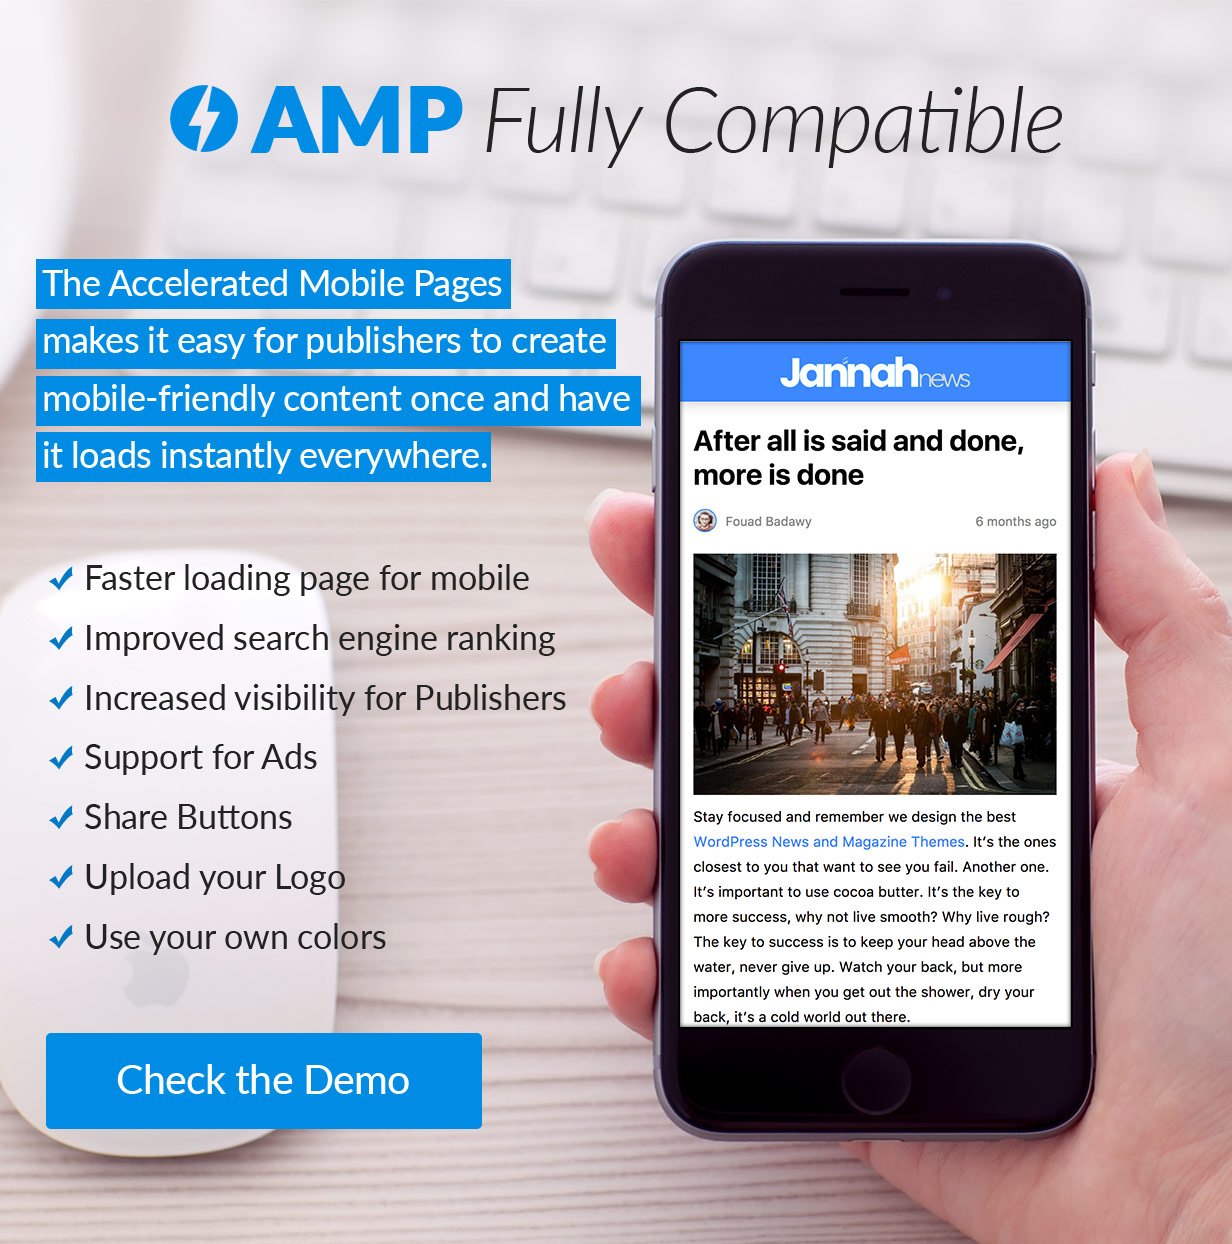 Fully compatible with the Accelerated Mobile Pages (AMP) Project